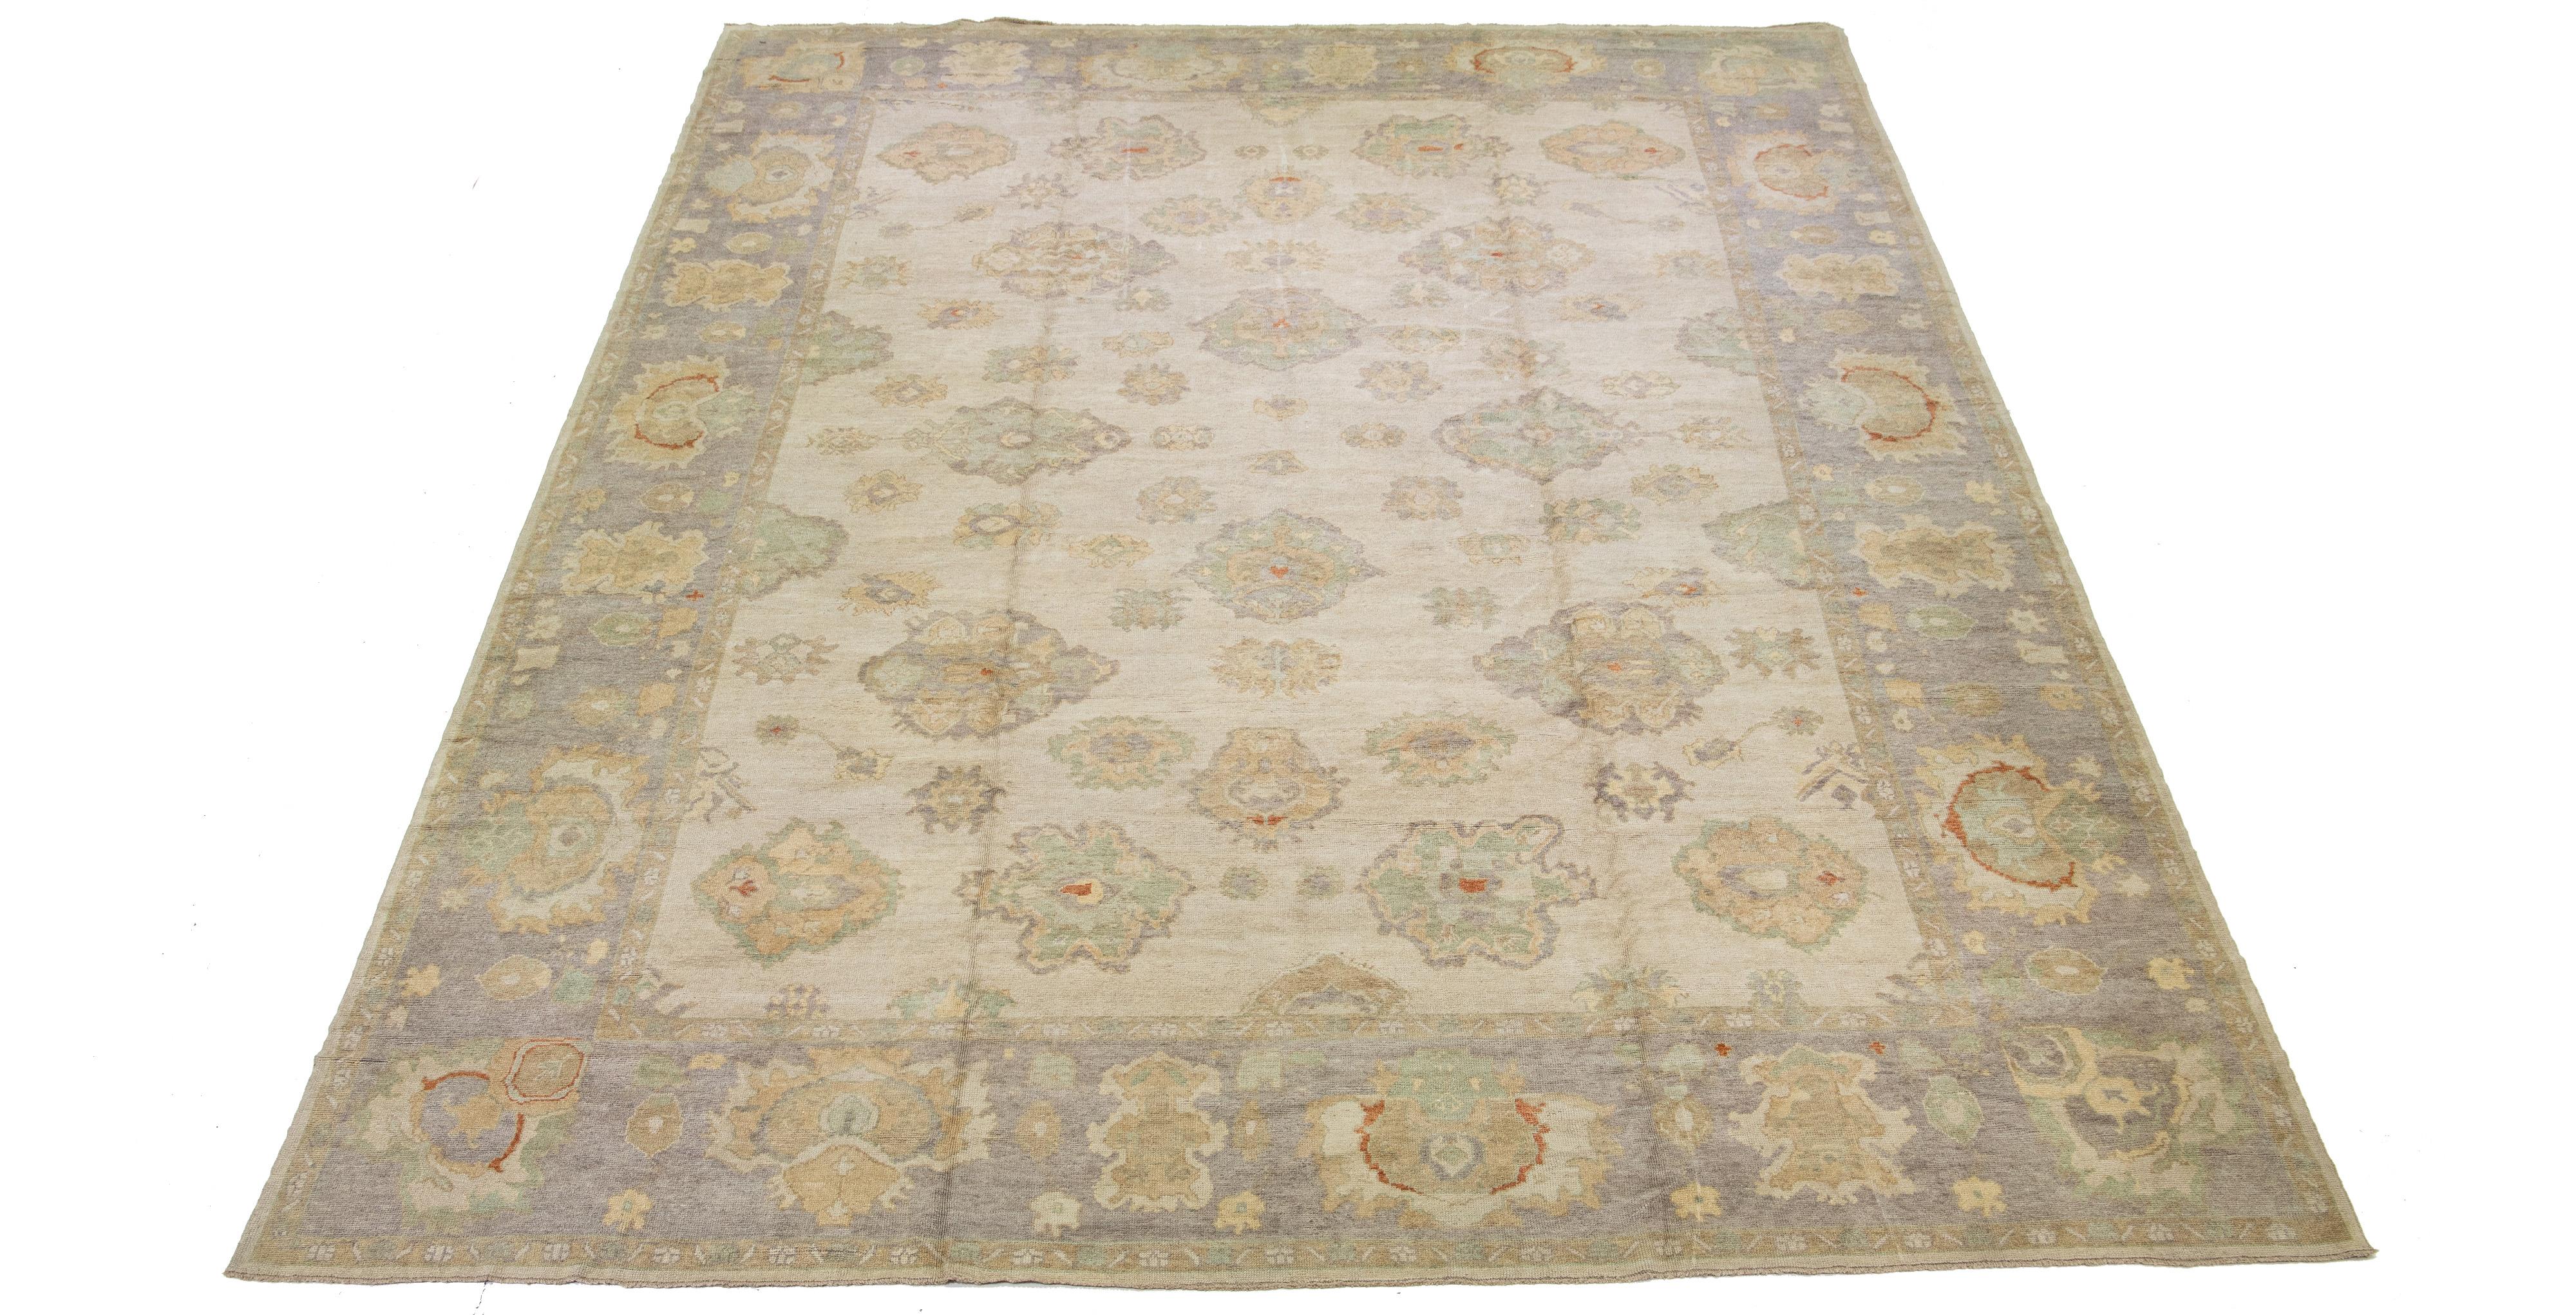 This Turkish wool rug, styled in antique fashion, showcases a delightful beige foundation. It's carefully hand-knotted focusing on every detail. The rug is enhanced by beautiful green, gray, and brown accents and presents an enticing floral design